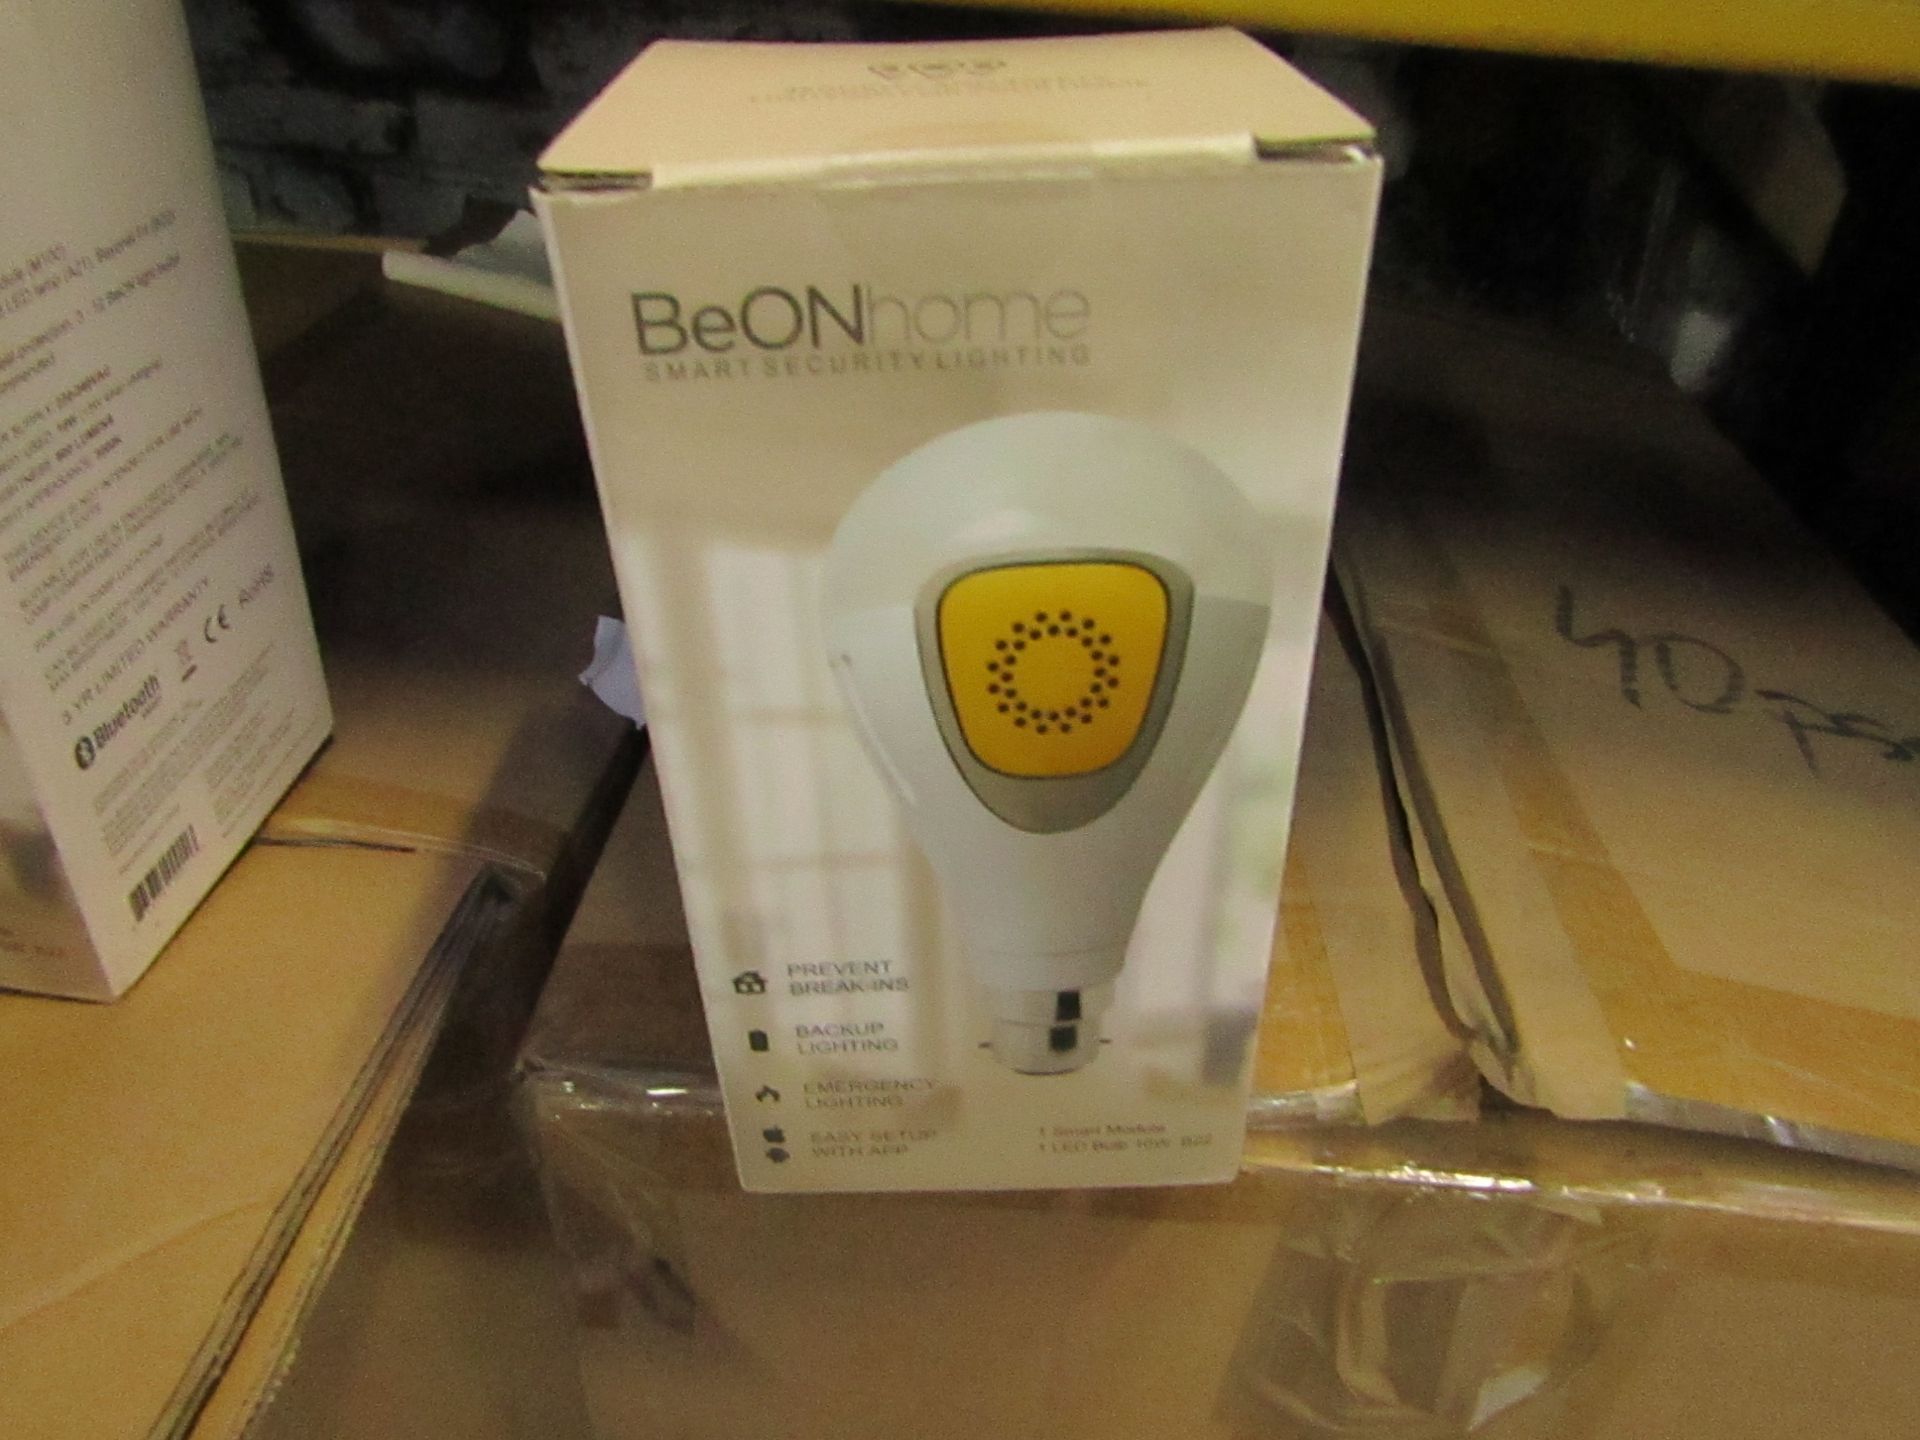 Be on home Smart Security Lighting - New & Boxed